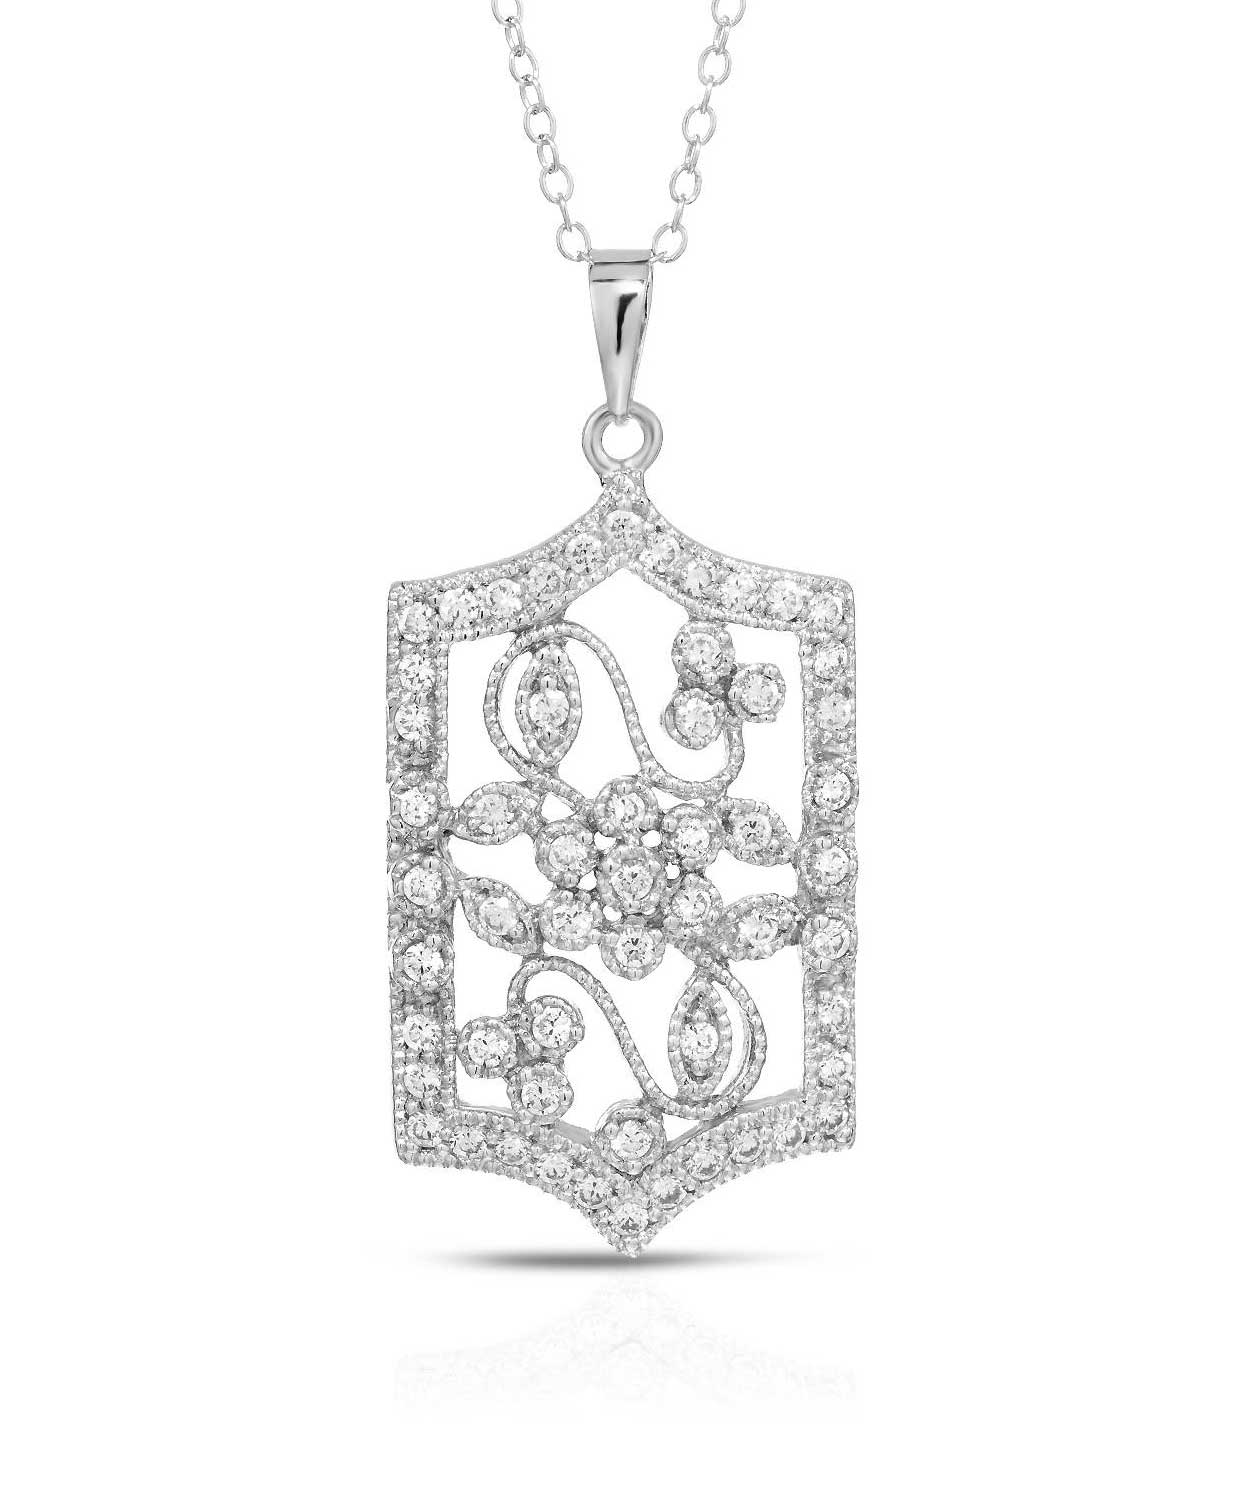 Brilliant Cut Cubic Zirconia Rhodium Plated 925 Sterling Silver Flower Pendant With Chain View 1